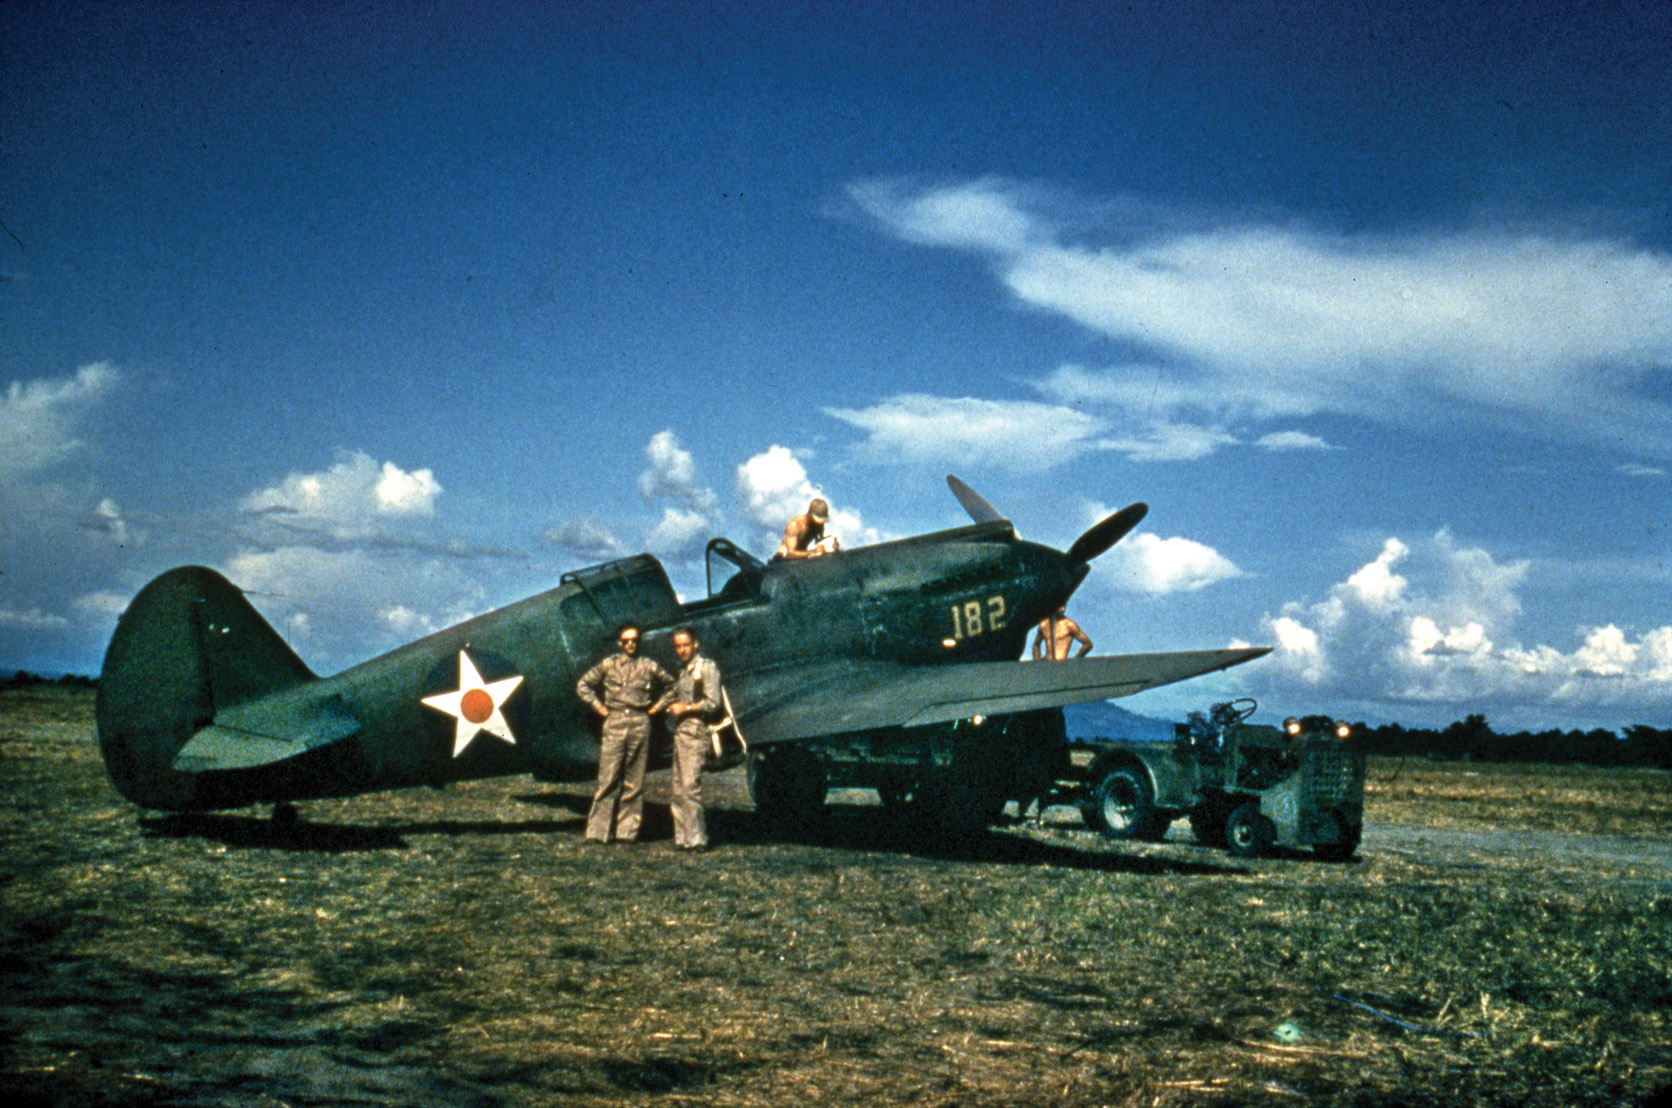 A Curtiss P-40 Tomahawk fighter sits near a runway in the Philippines. Although inferior to the Japanese Mitsubishi Zero, the rugged P-40 was the most advanced American fighter type in service in the Pacific in the early days of the war.